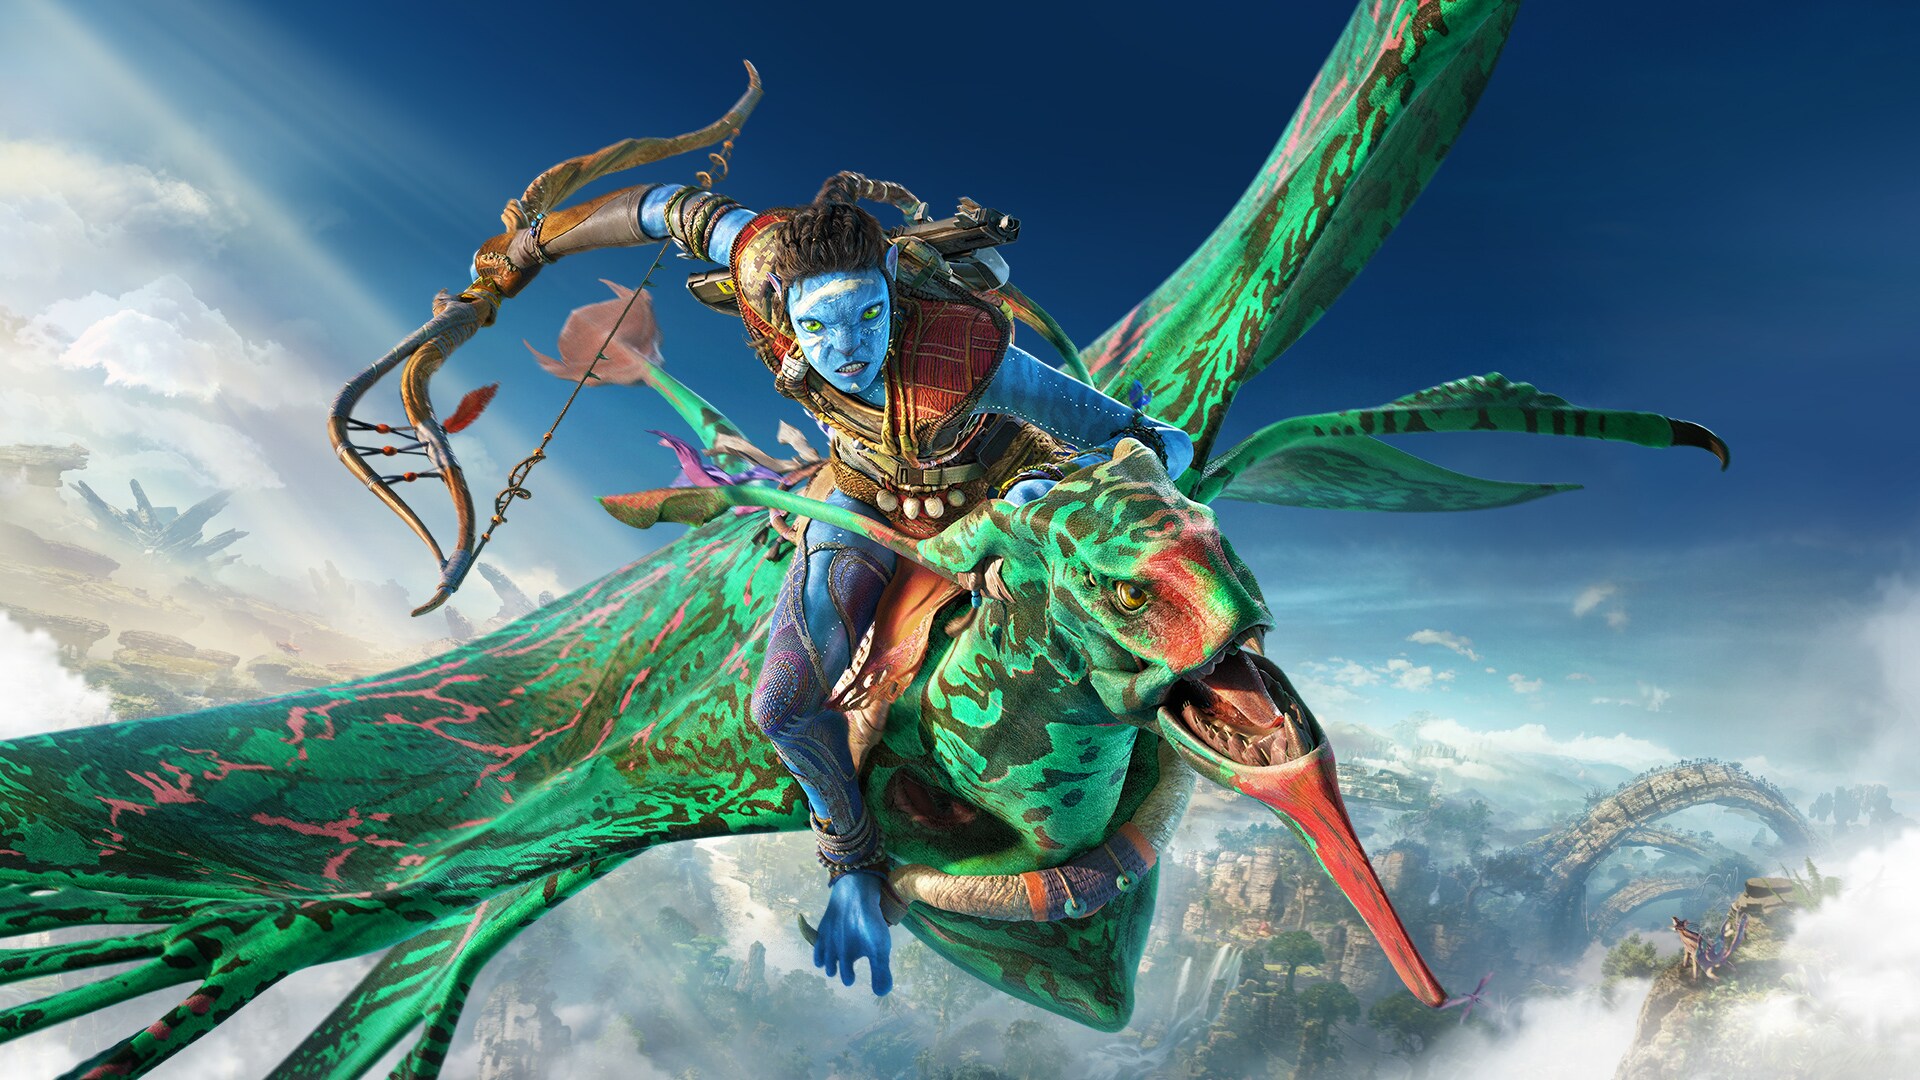 James Cameron Might Not Direct Avatar 4 And 5 Himself – Exclusive